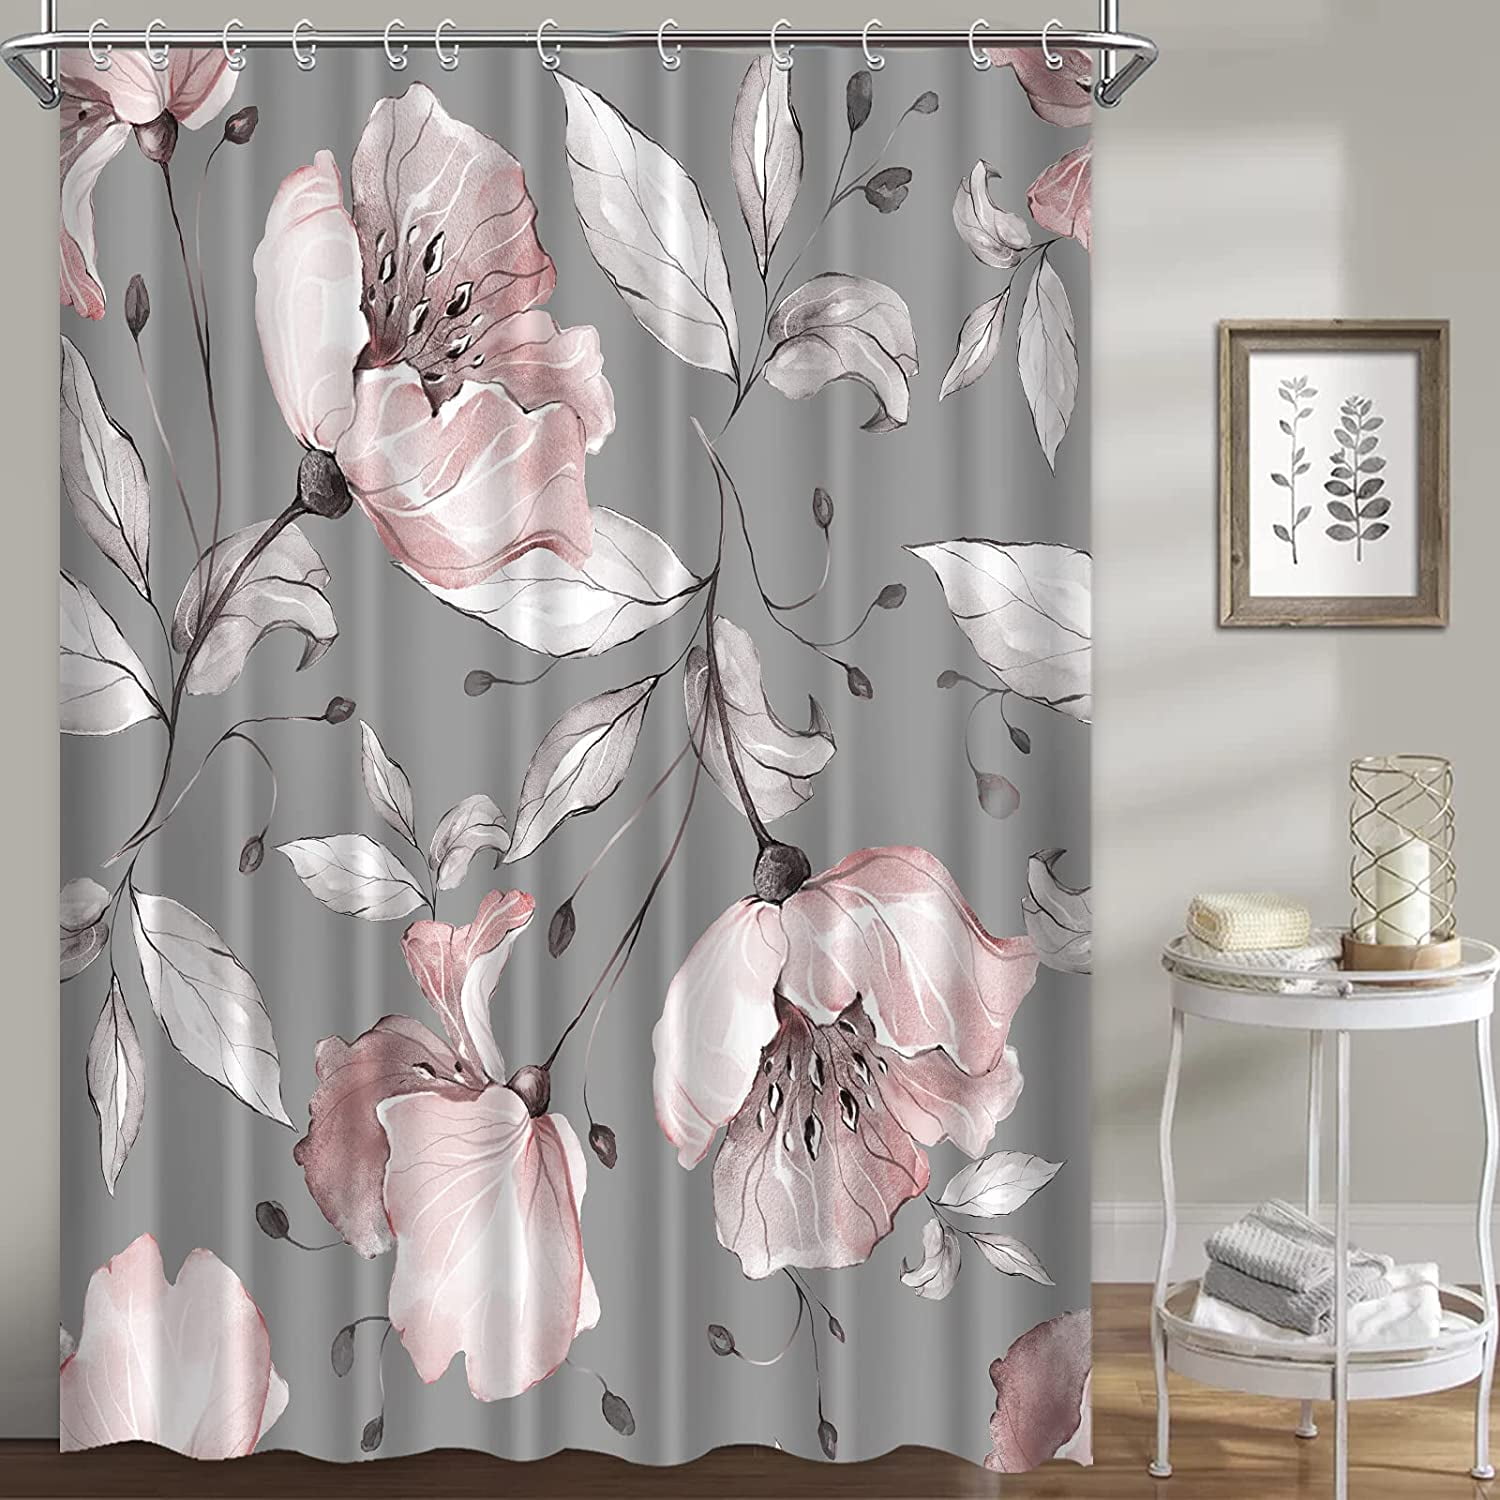 Details about   Spring Flowers  Pink Rose Flower on Rustic Shower Curtain Bathroom Accessories 